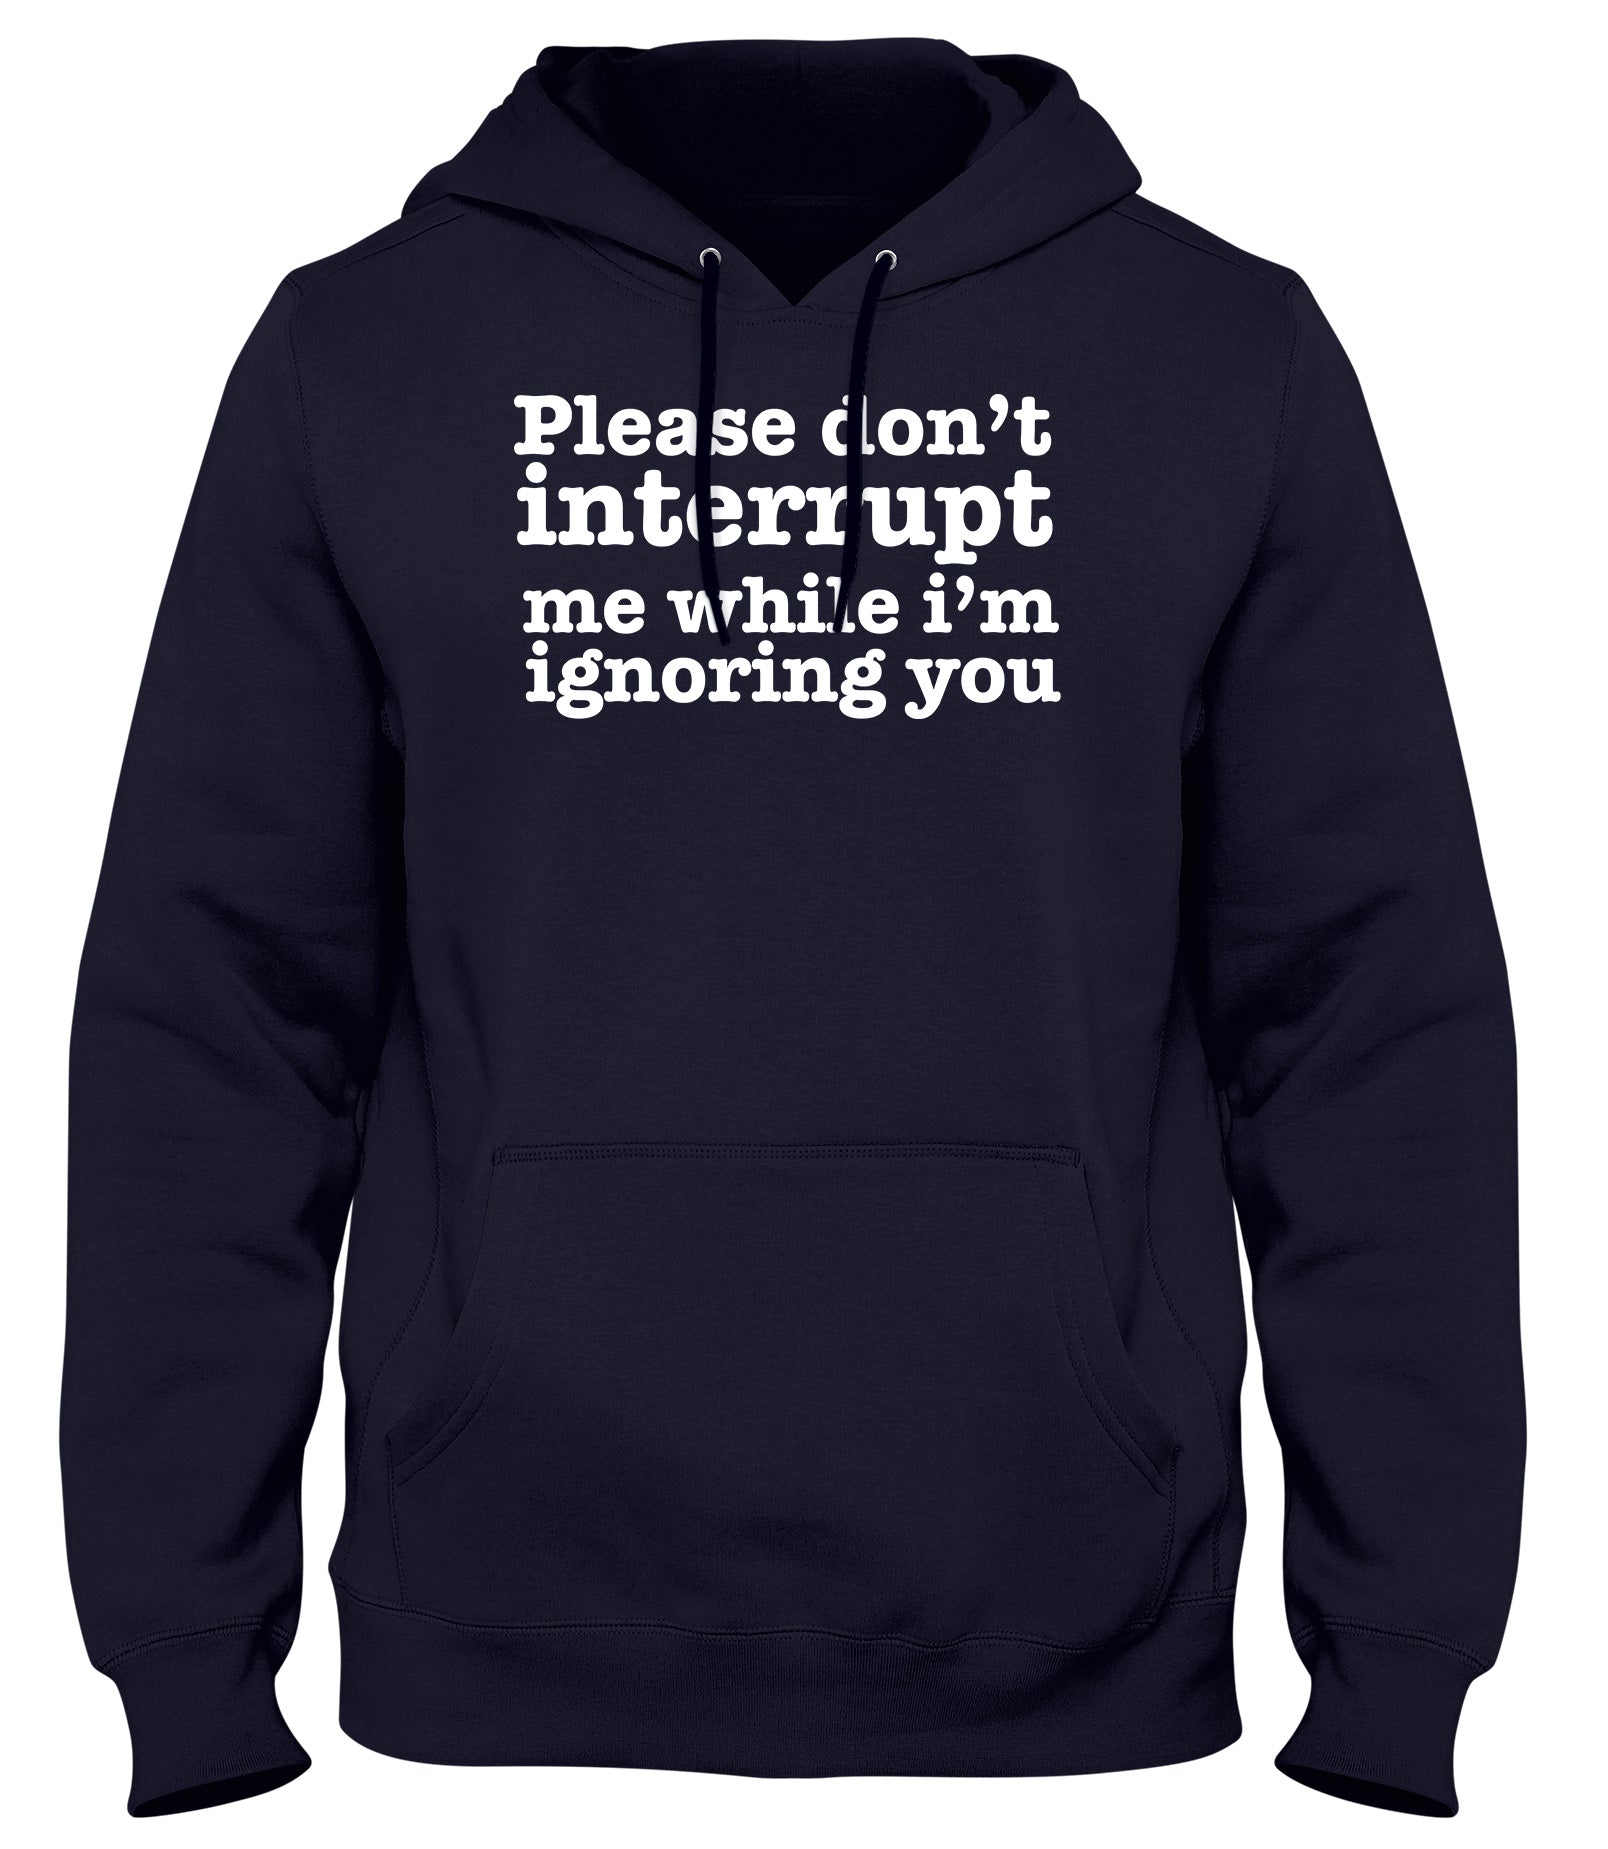 PLEASE DON'T INTERRUPT ME WHILE I'M IGNORING YOU WOMENS LADIES MENS UNISEX HOODIE